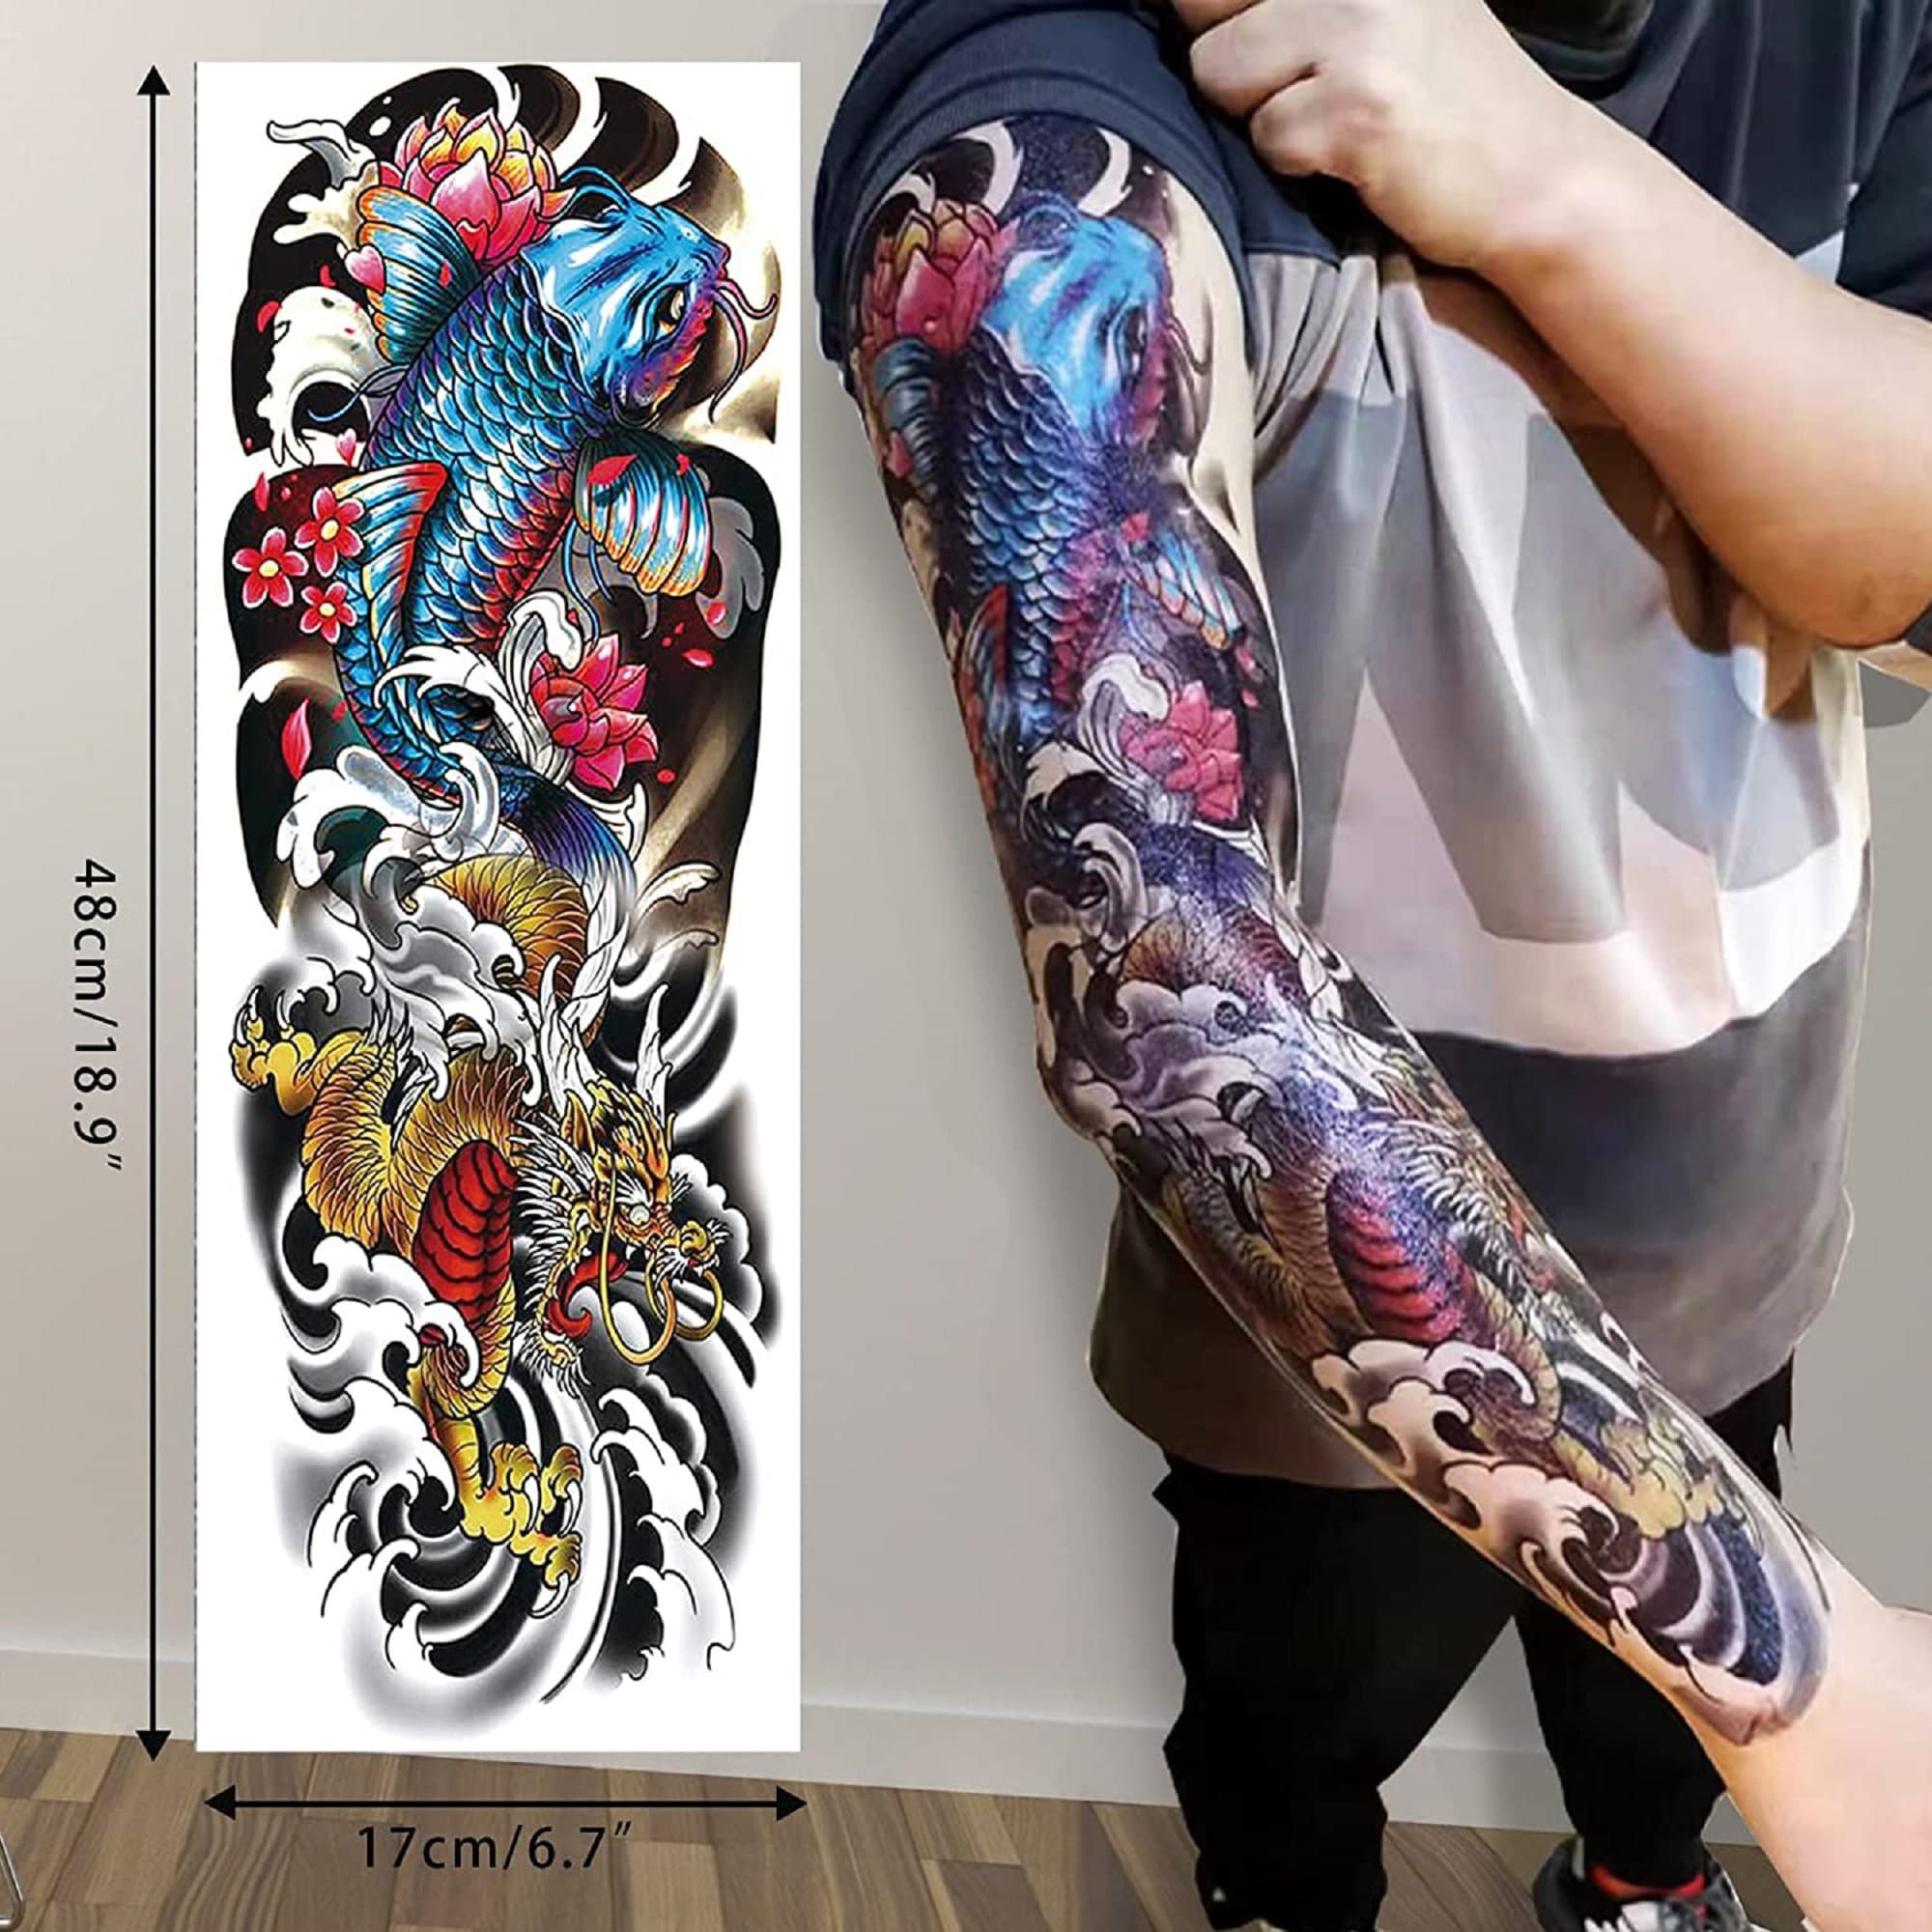 The 75 Best Koi Fish Tattoo Designs for Men  Improb  Japanese tattoo koi  Koi dragon tattoo Koi tattoo sleeve